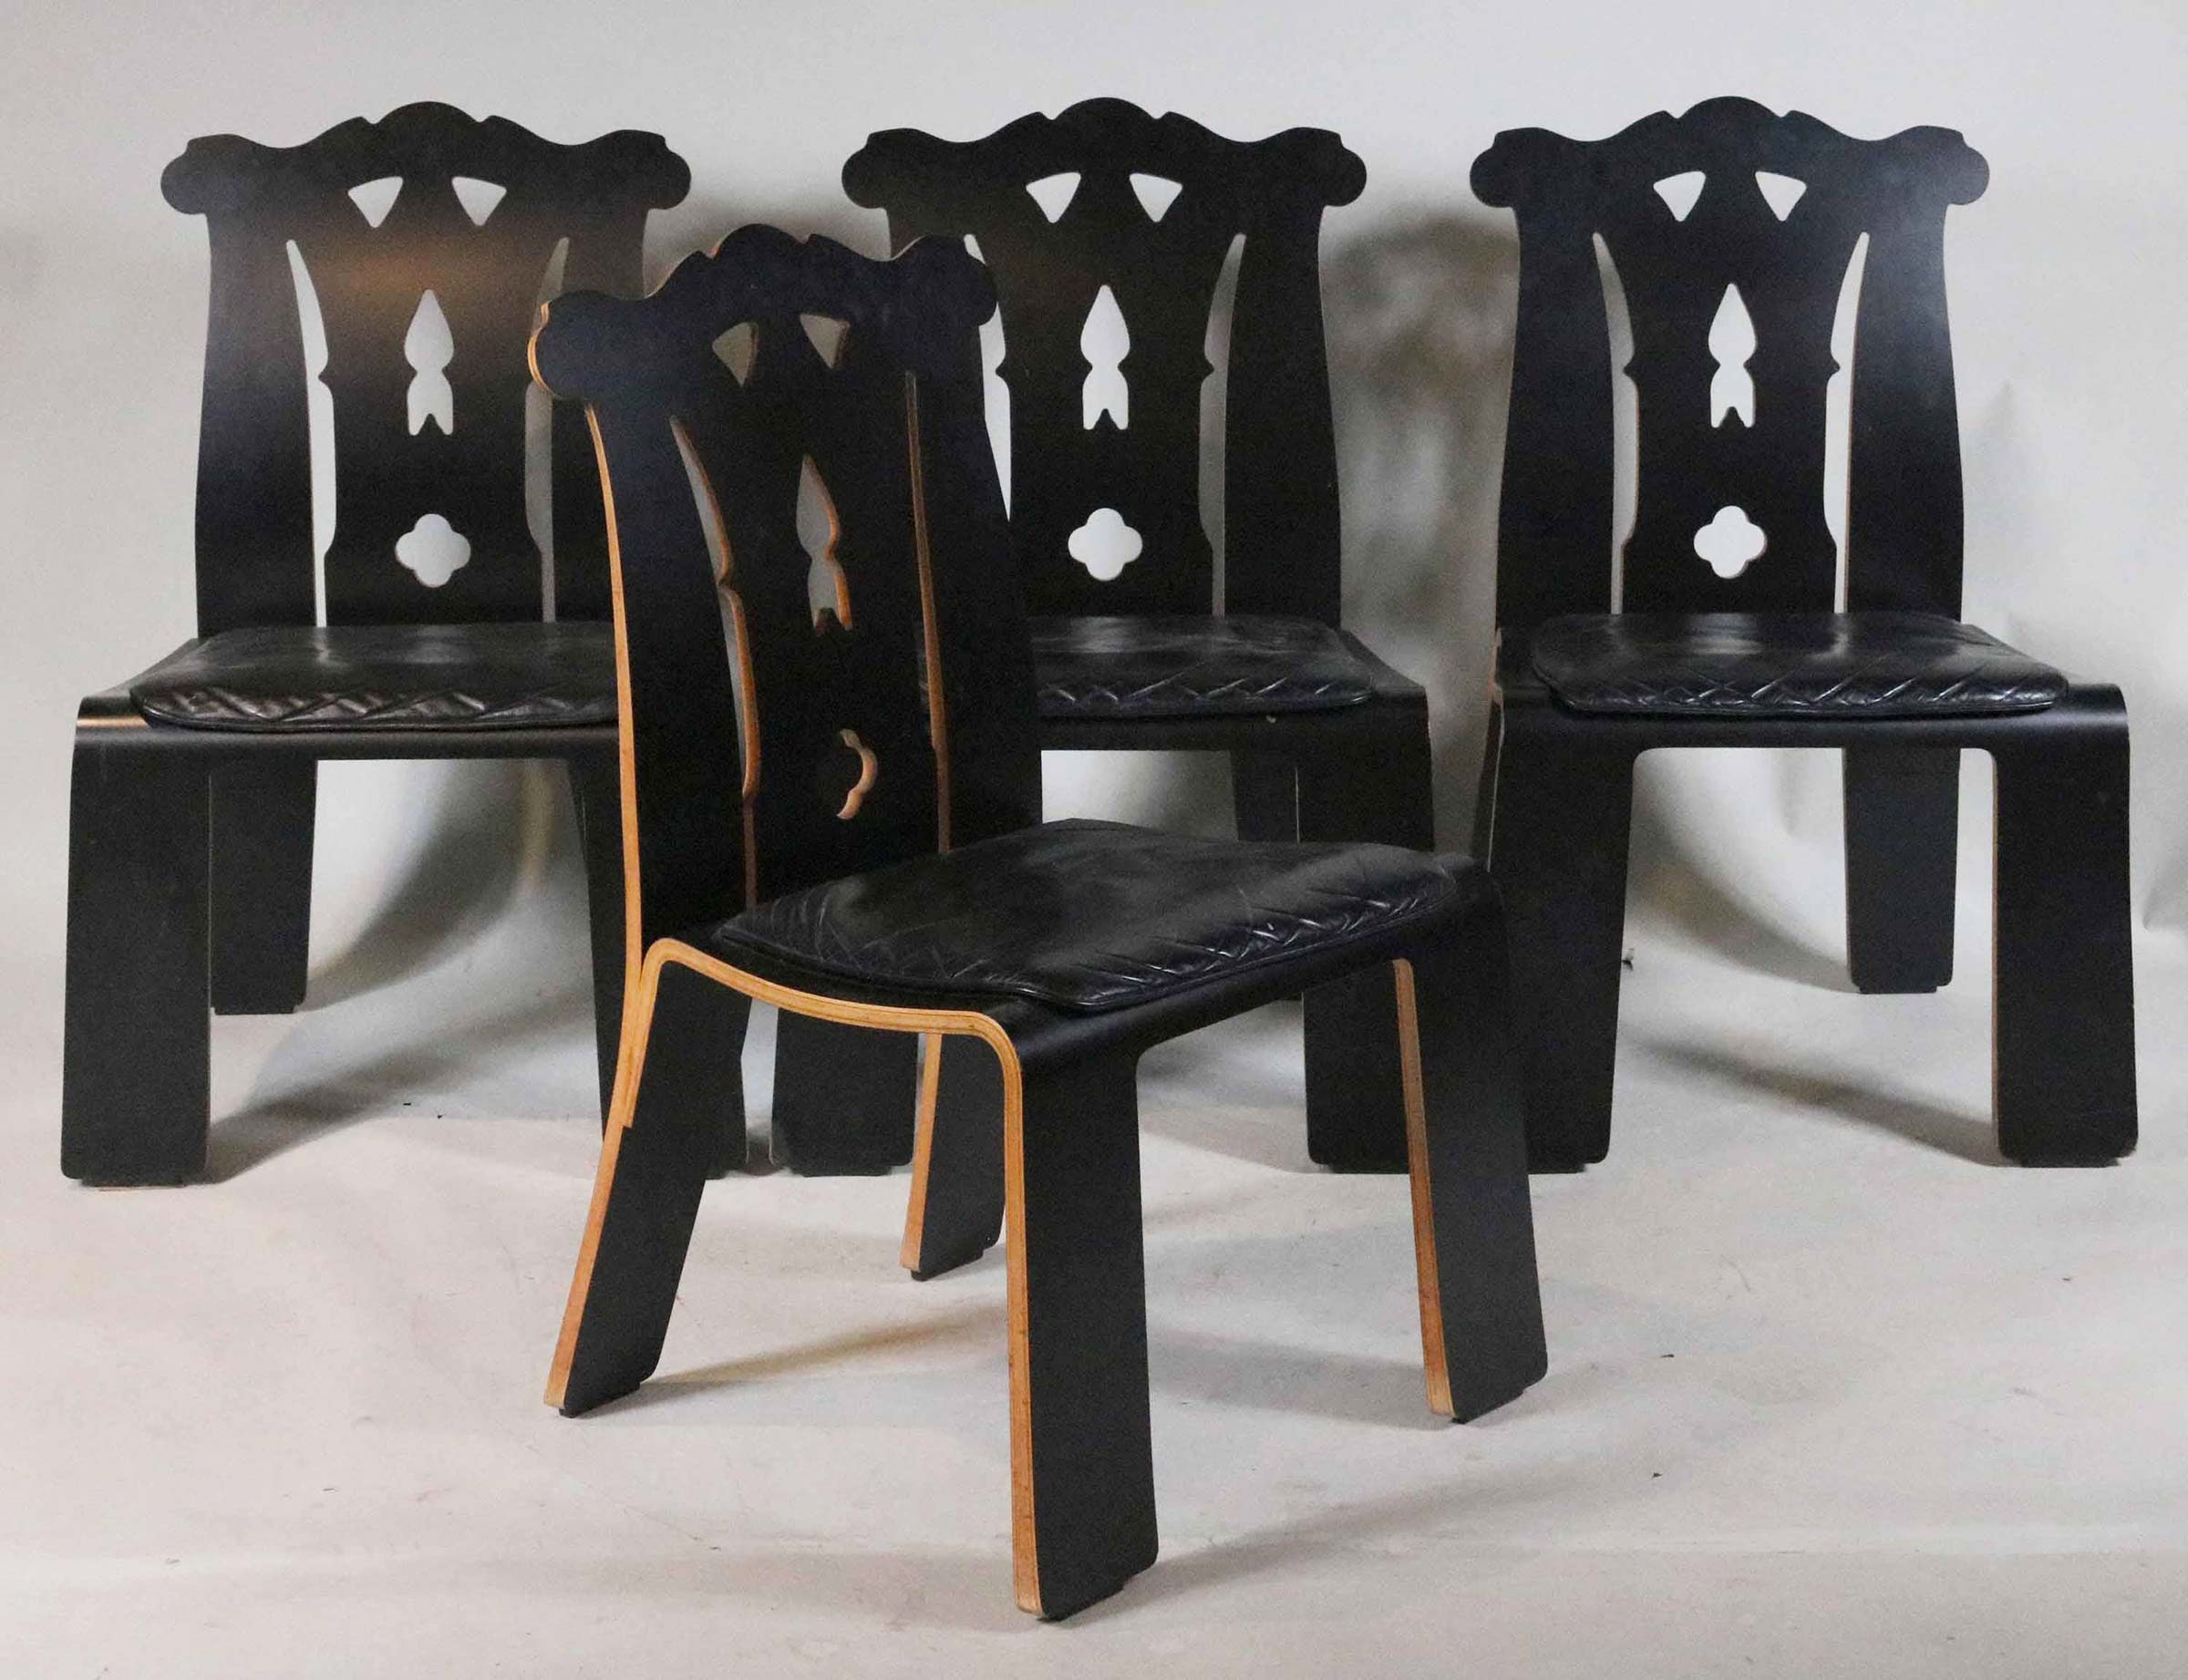 Four Robert Venturi Chippendale chairs, 1984-85, having laminate on plywood frames with leather seats, earned $15,000 plus buyer’s premium in January 2021 at Nye & Company. Photo courtesy of Nye & Company and LiveAuctioneers